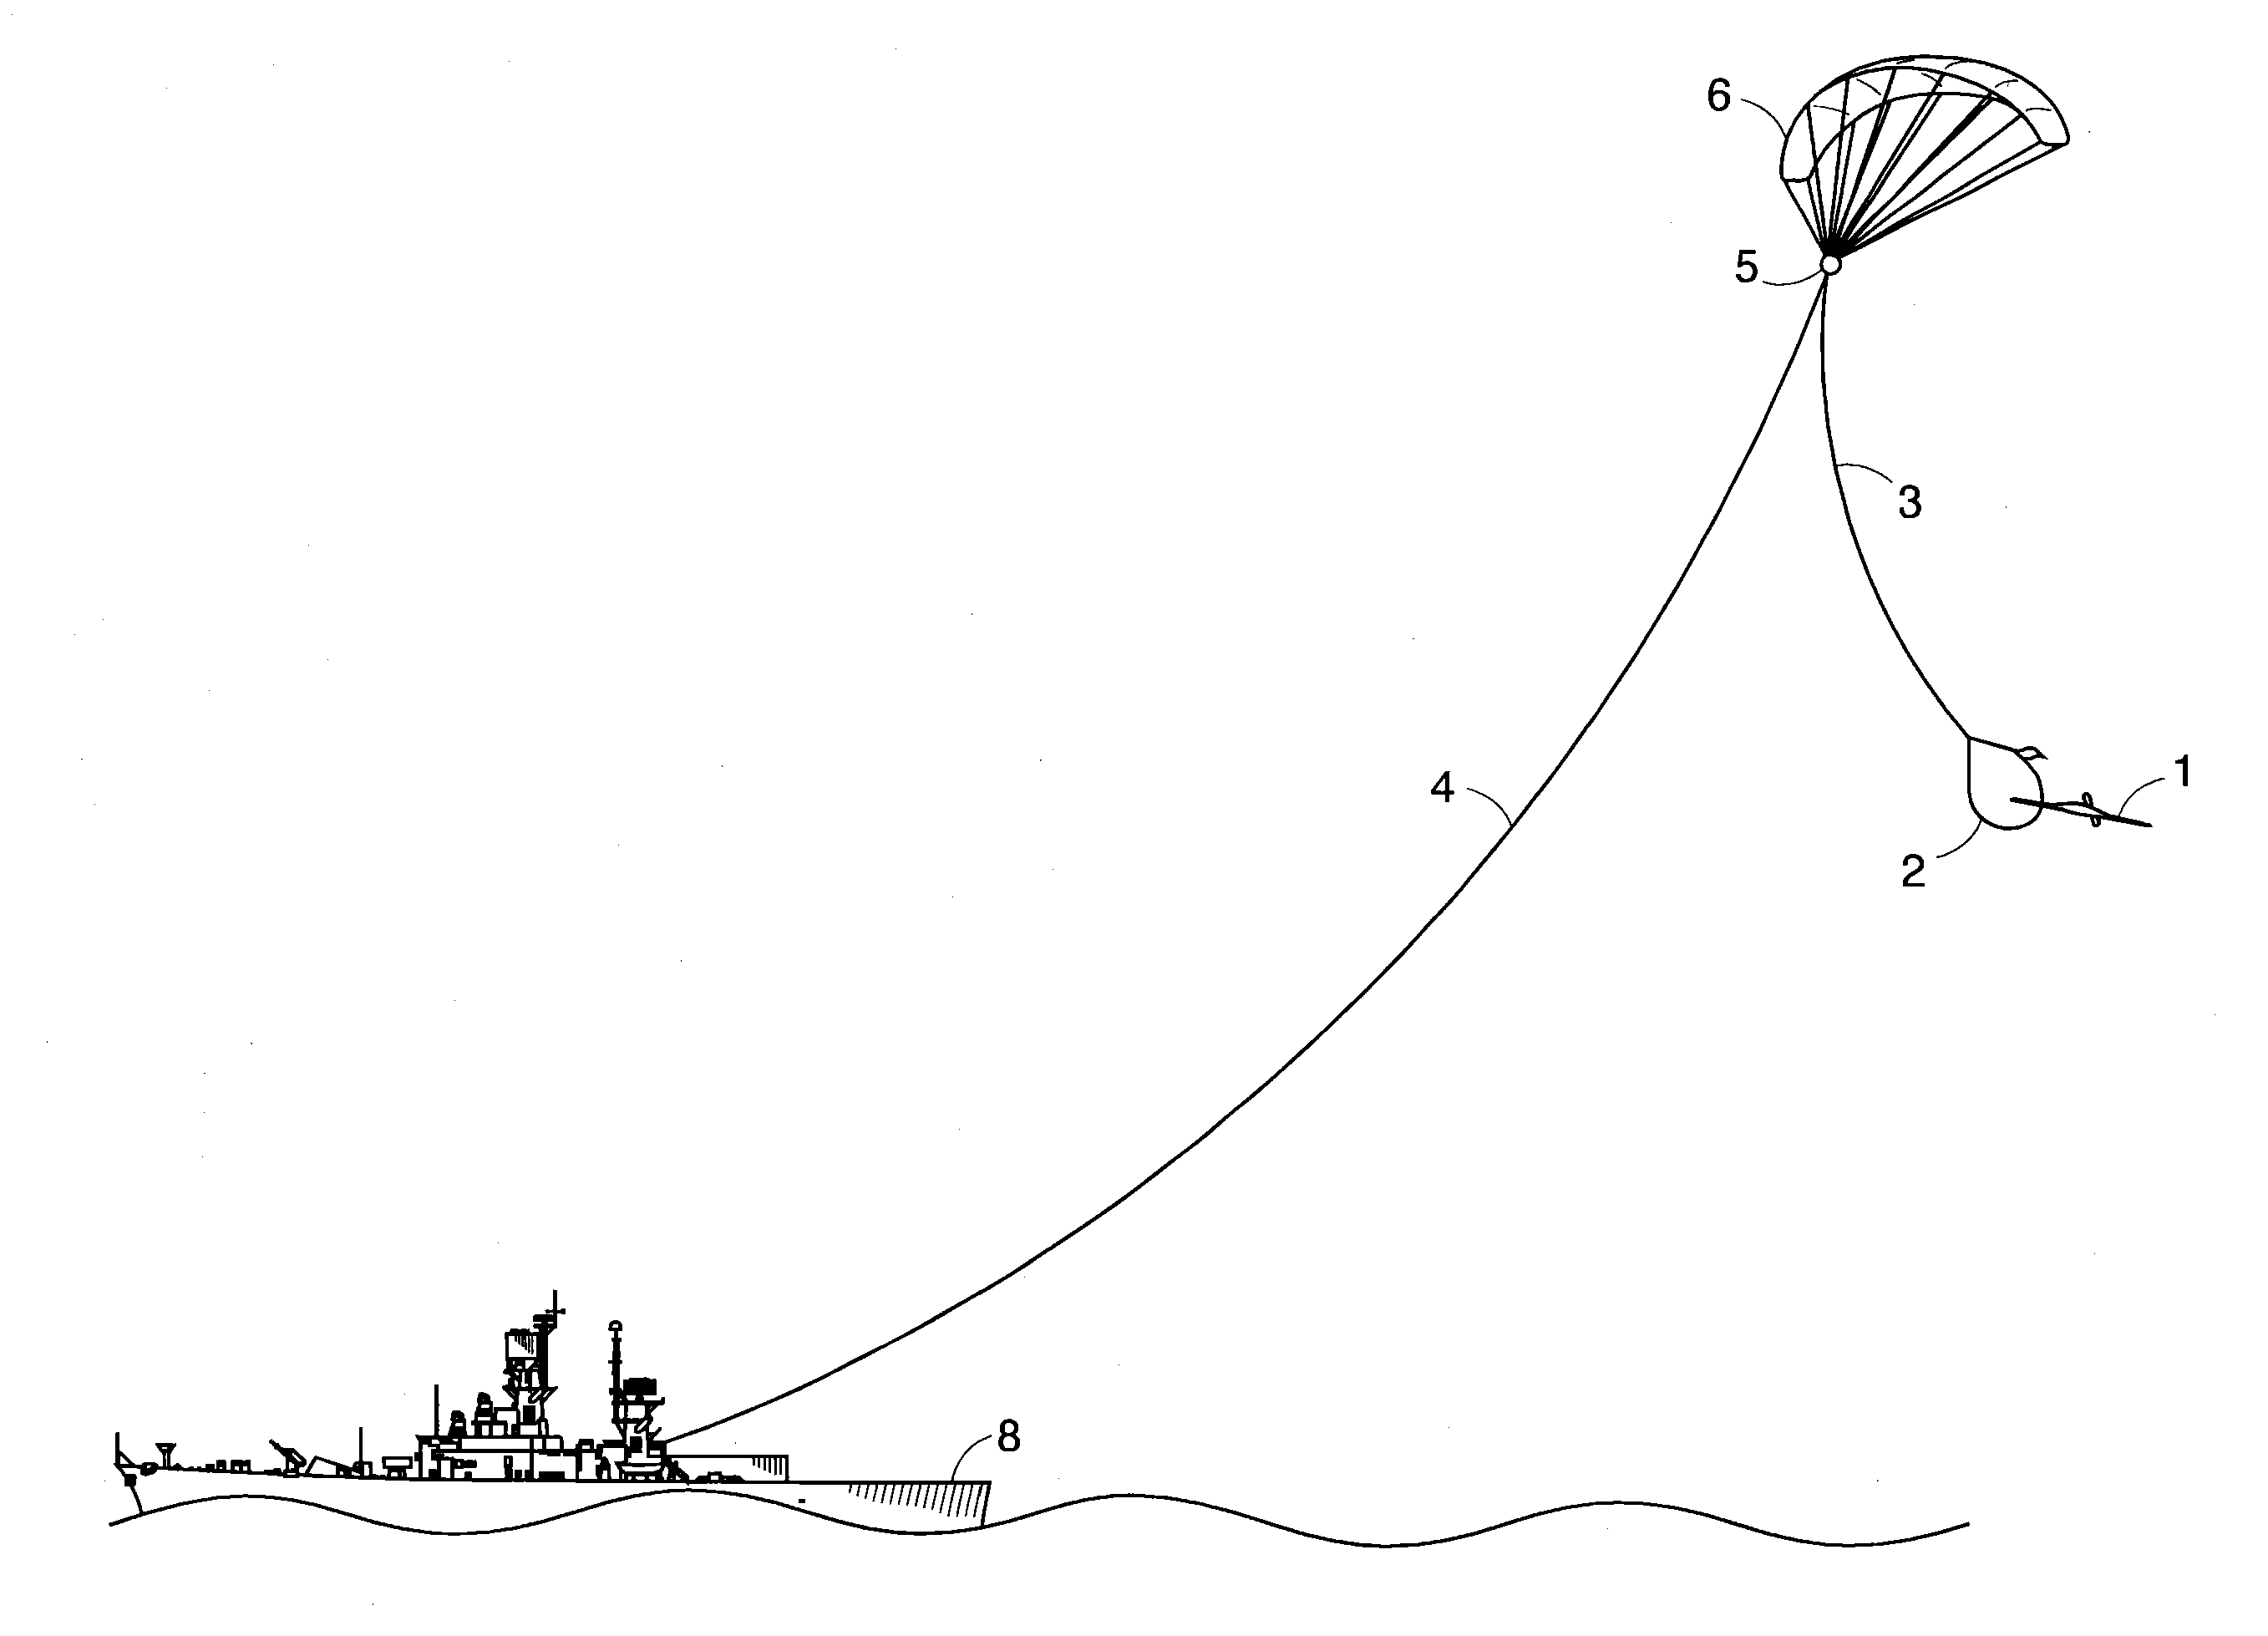 Asymmetric aircraft and their launch and recovery systems from small ships